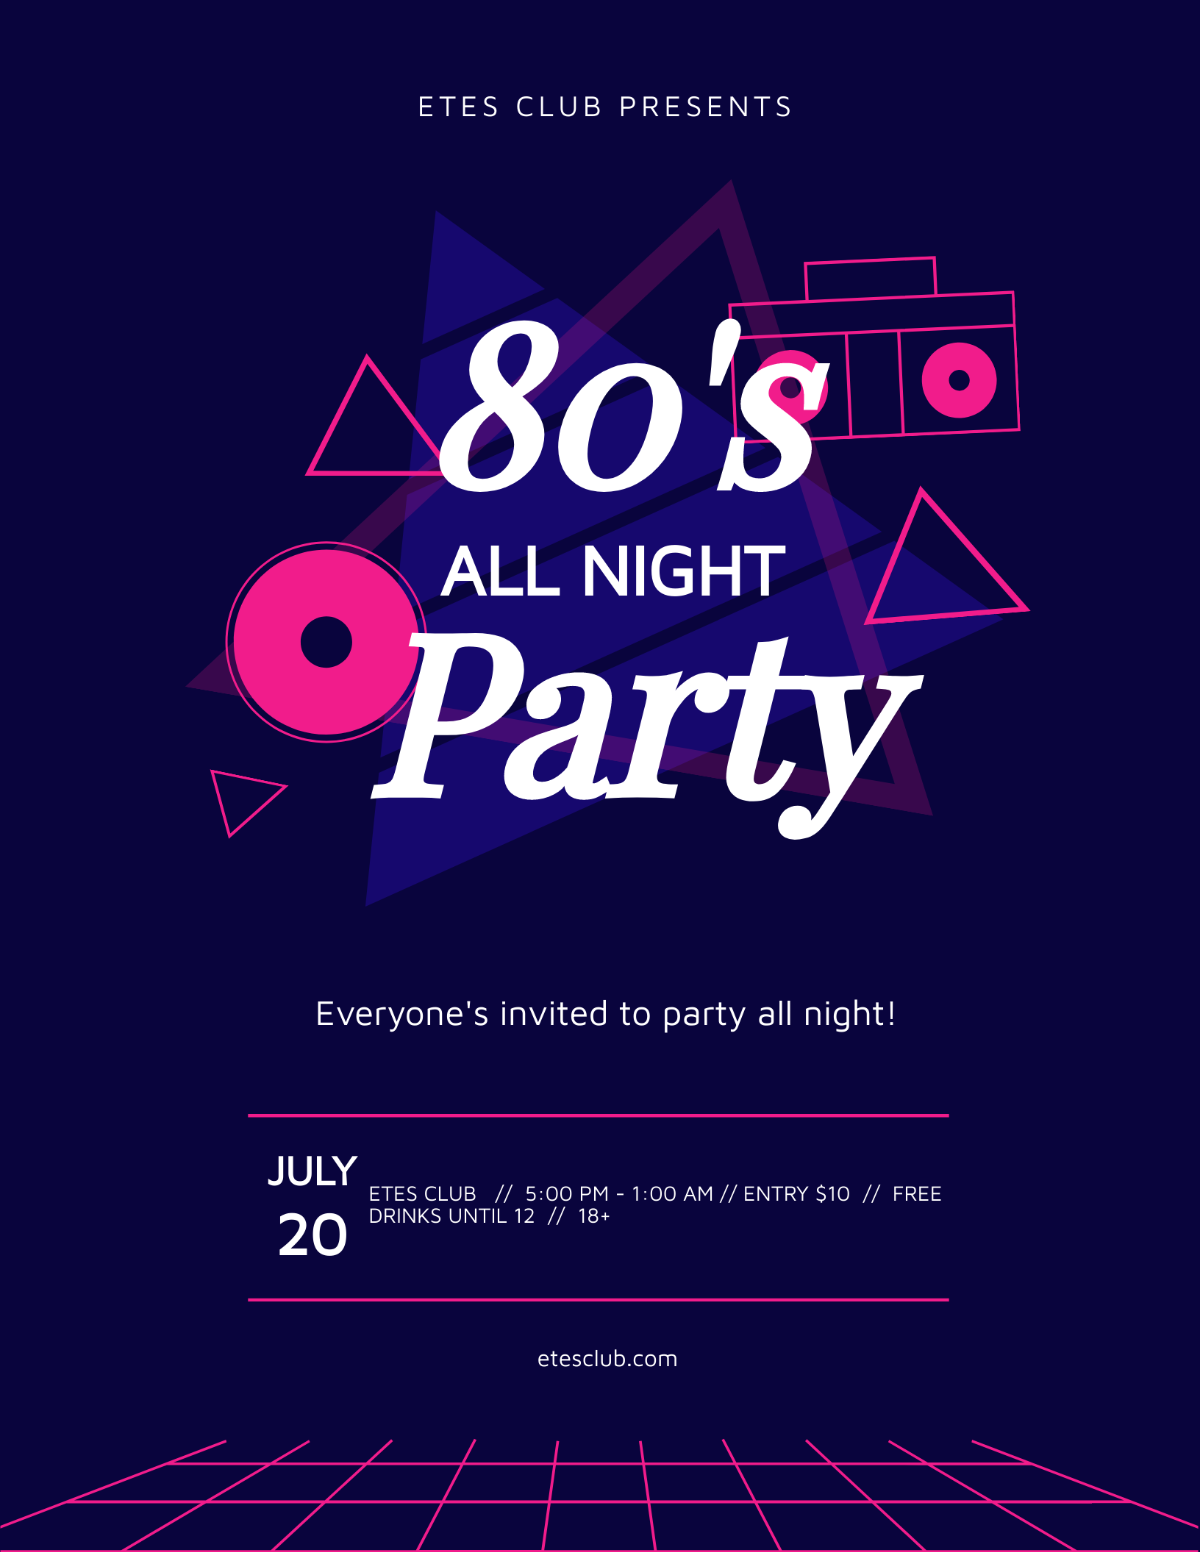 Free Classics 80s party Flyer Template